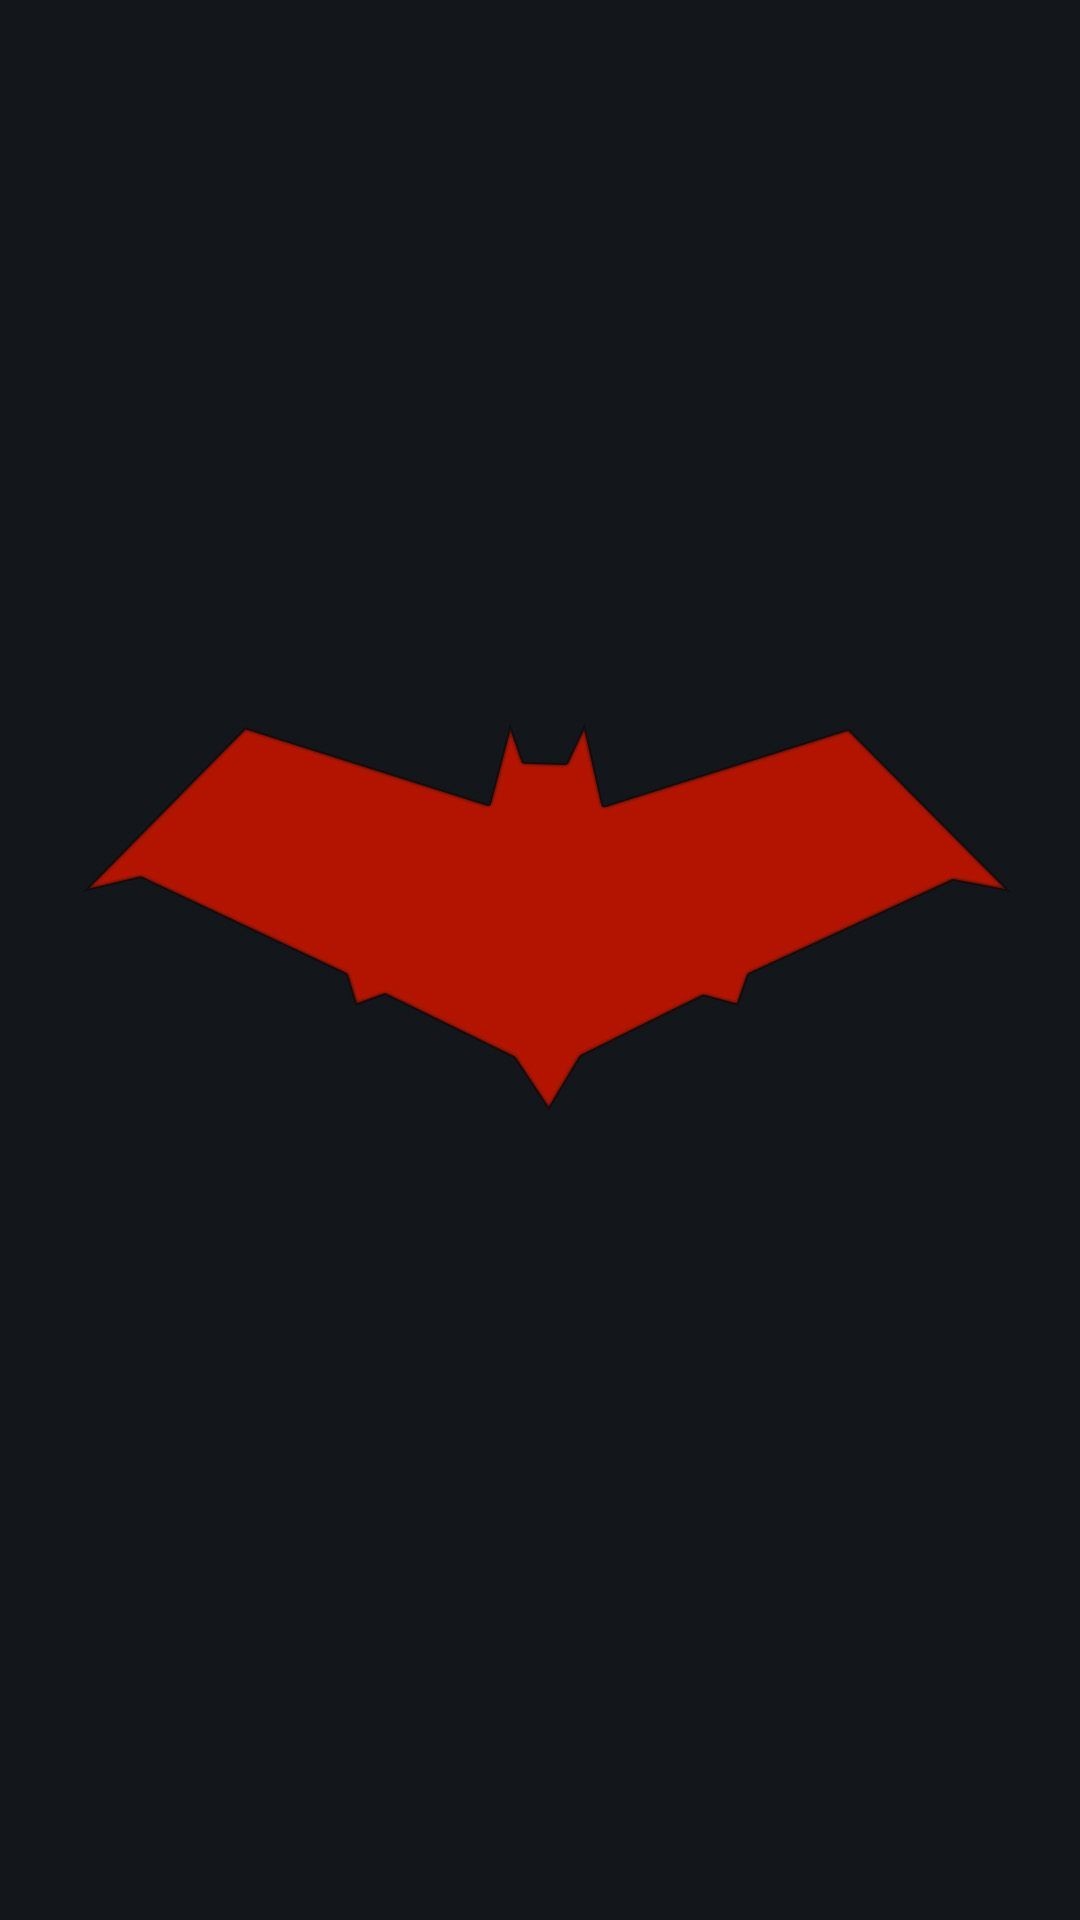 1080x1920 Red Hood Wallpapers and Desktop Backgrounds Free Download